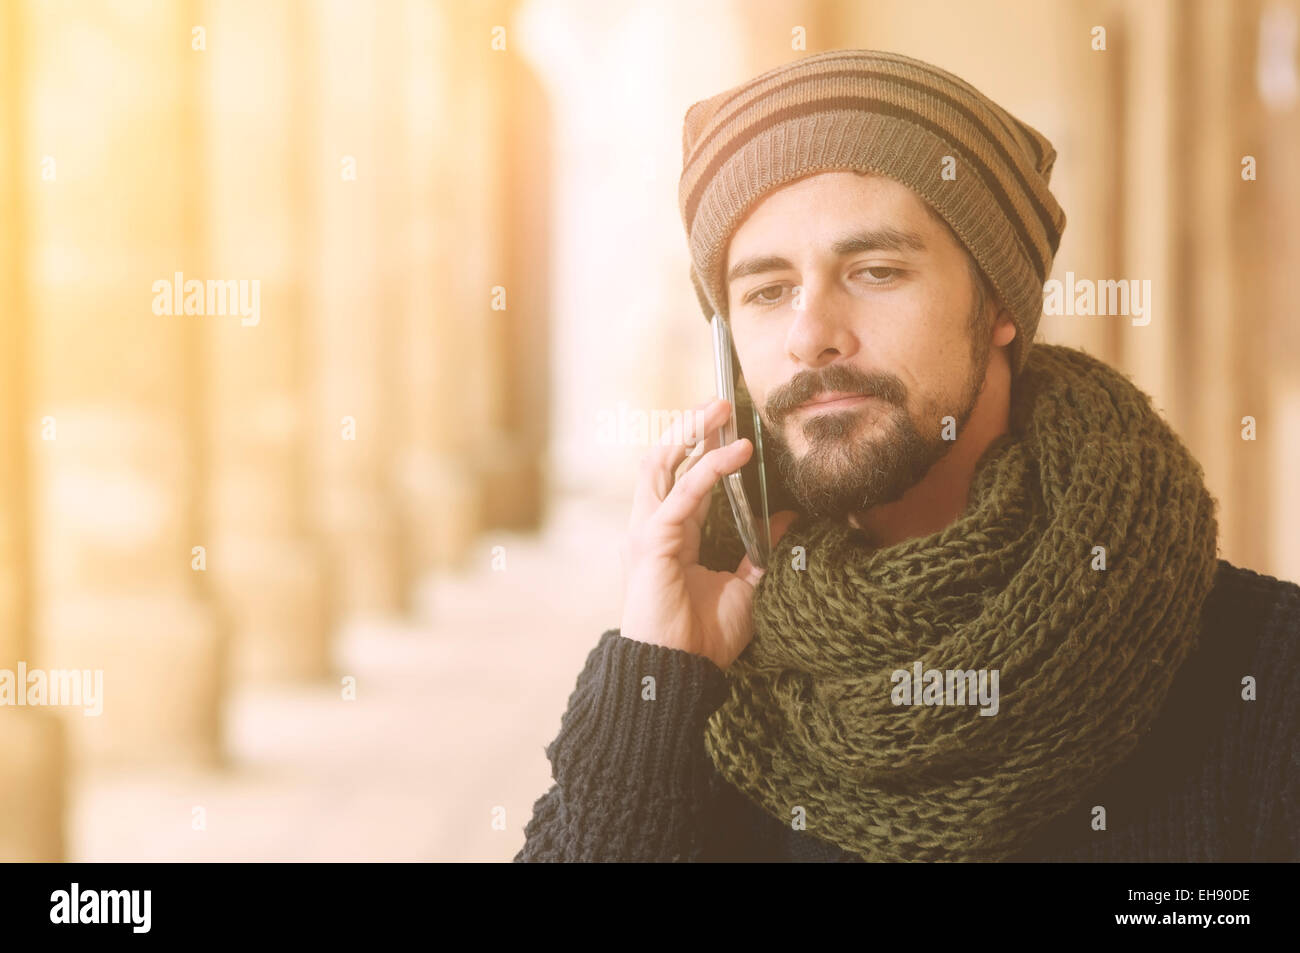 Lifestyle portrait of a young man using a smart phone outdoors warm tones filter applied Stock Photo